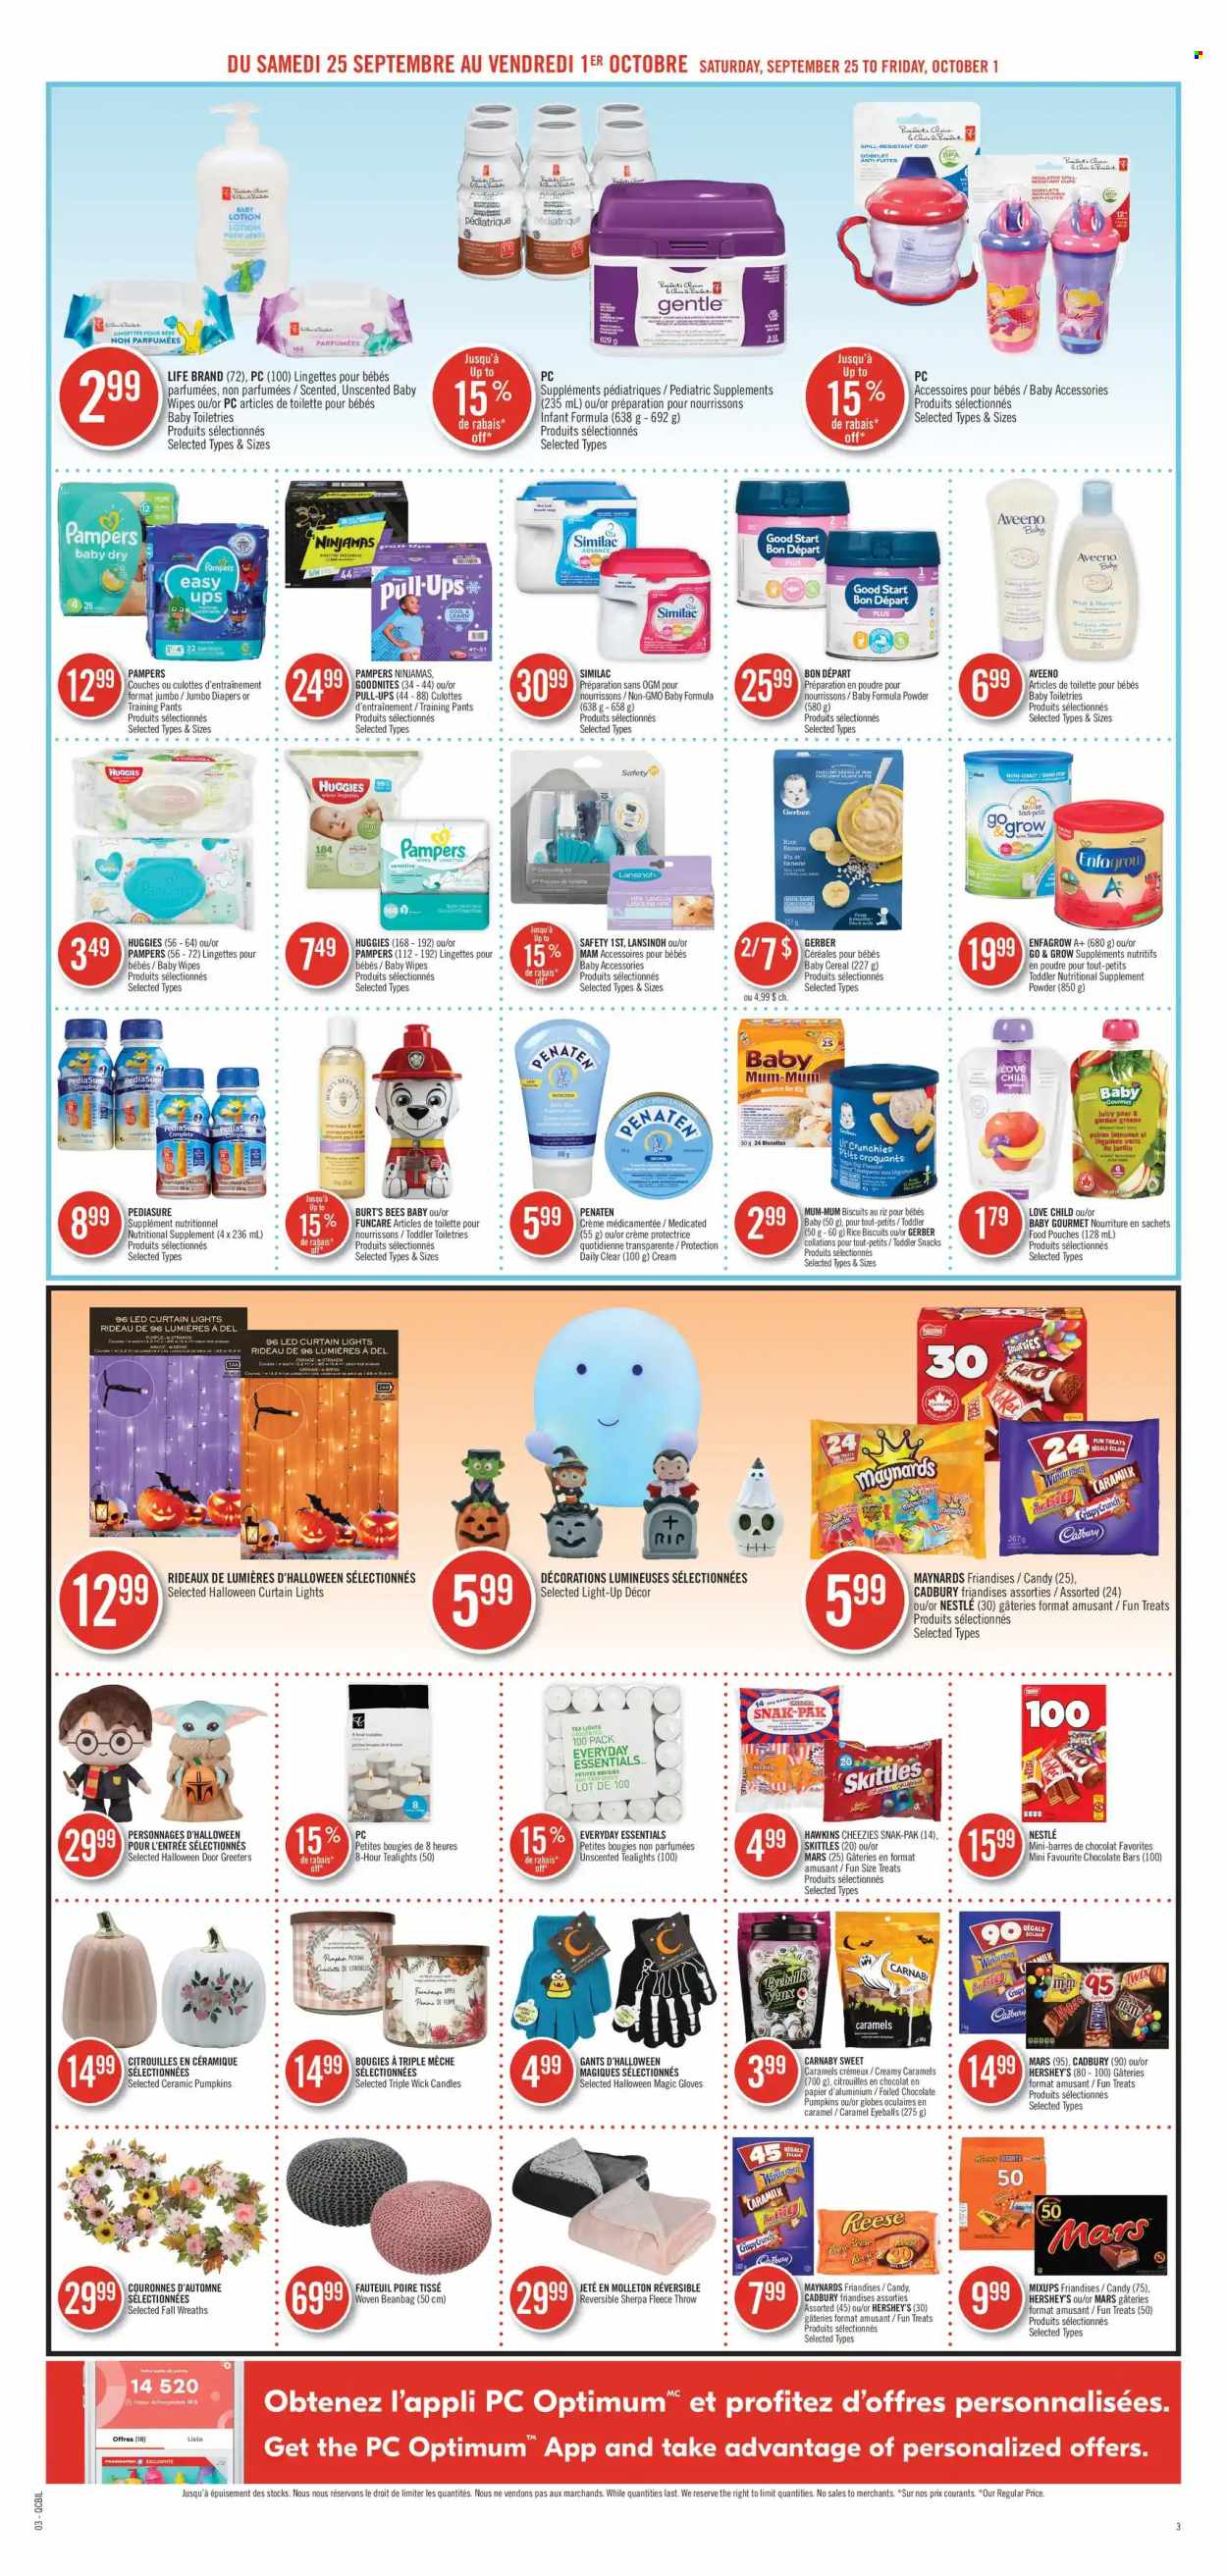 thumbnail - Pharmaprix Flyer - September 25, 2021 - October 01, 2021 - Sales products - pumpkin, Hershey's, snack, Mars, biscuit, Cadbury, Skittles, chocolate bar, Gerber, cereals, rice, caramel, tea, Similac, wipes, pants, baby wipes, nappies, baby pants, Aveeno, body lotion, Mum, gloves, cup, candle, curtain, fleece throw, nutritional supplement, Nestlé, Huggies, Pampers. Page 3.